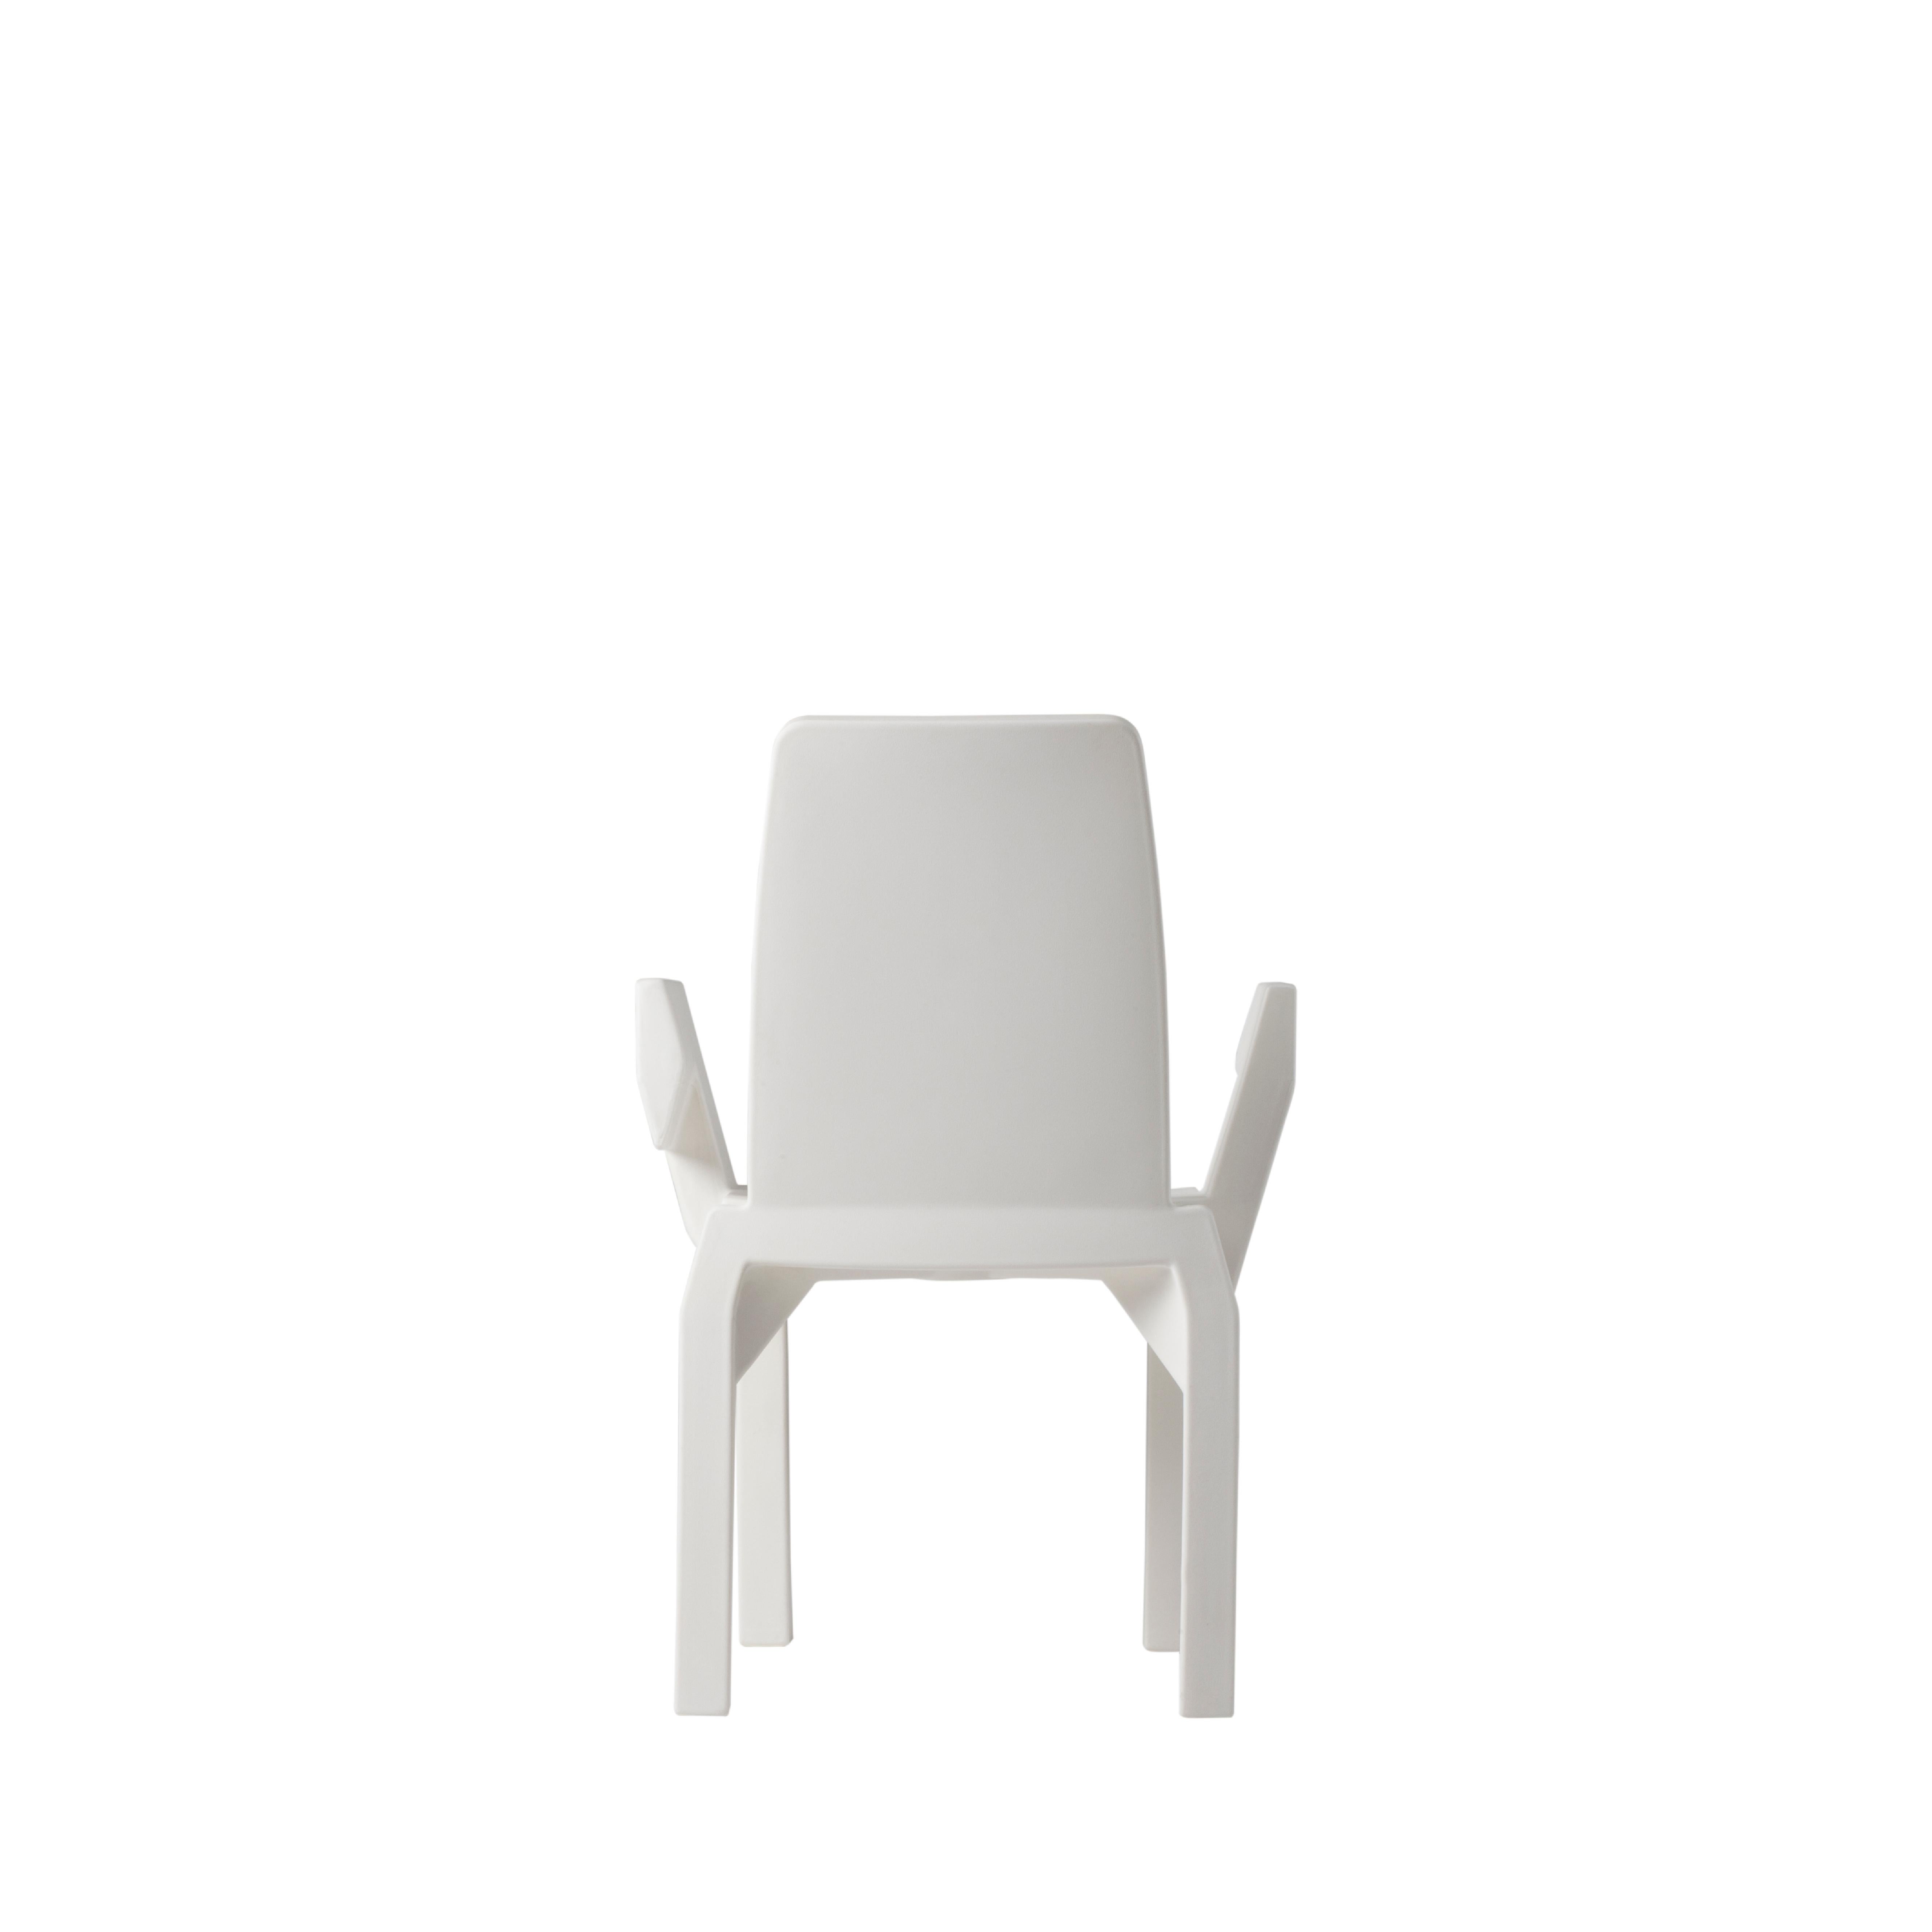 Italian Milky White Doublix Chair by Stirum Design For Sale